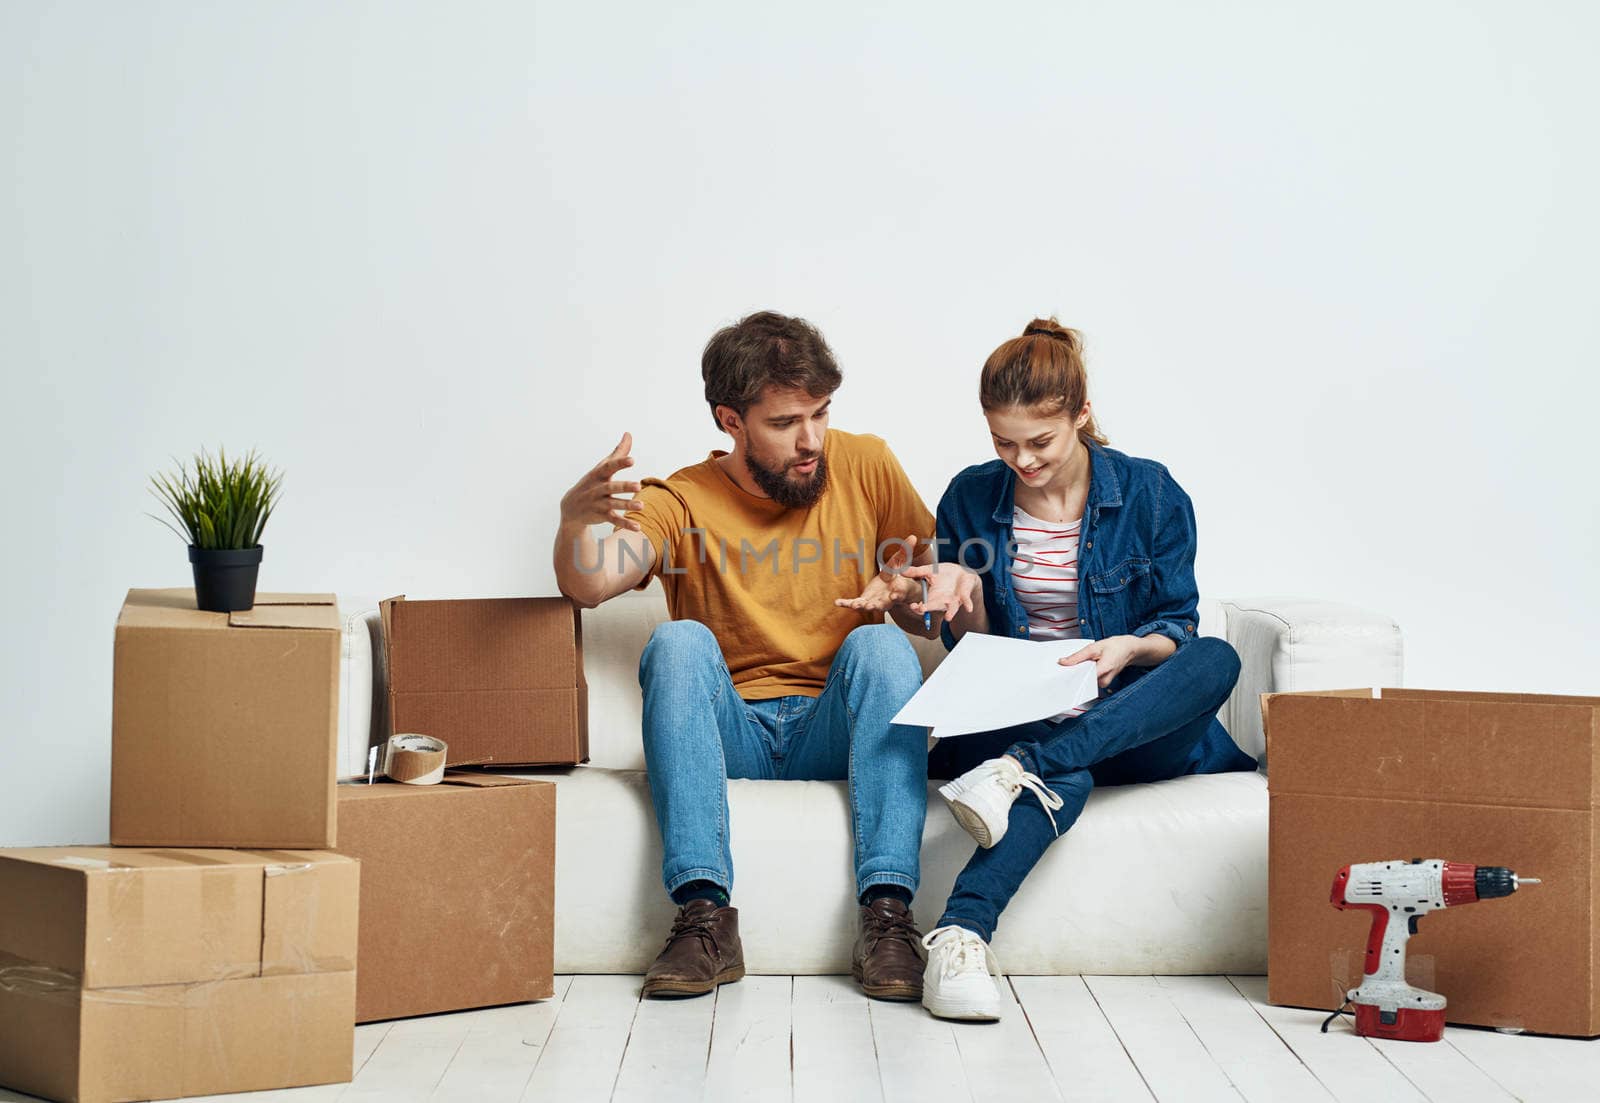 Man and woman in new room stuff in boxes moving family interior. High quality photo